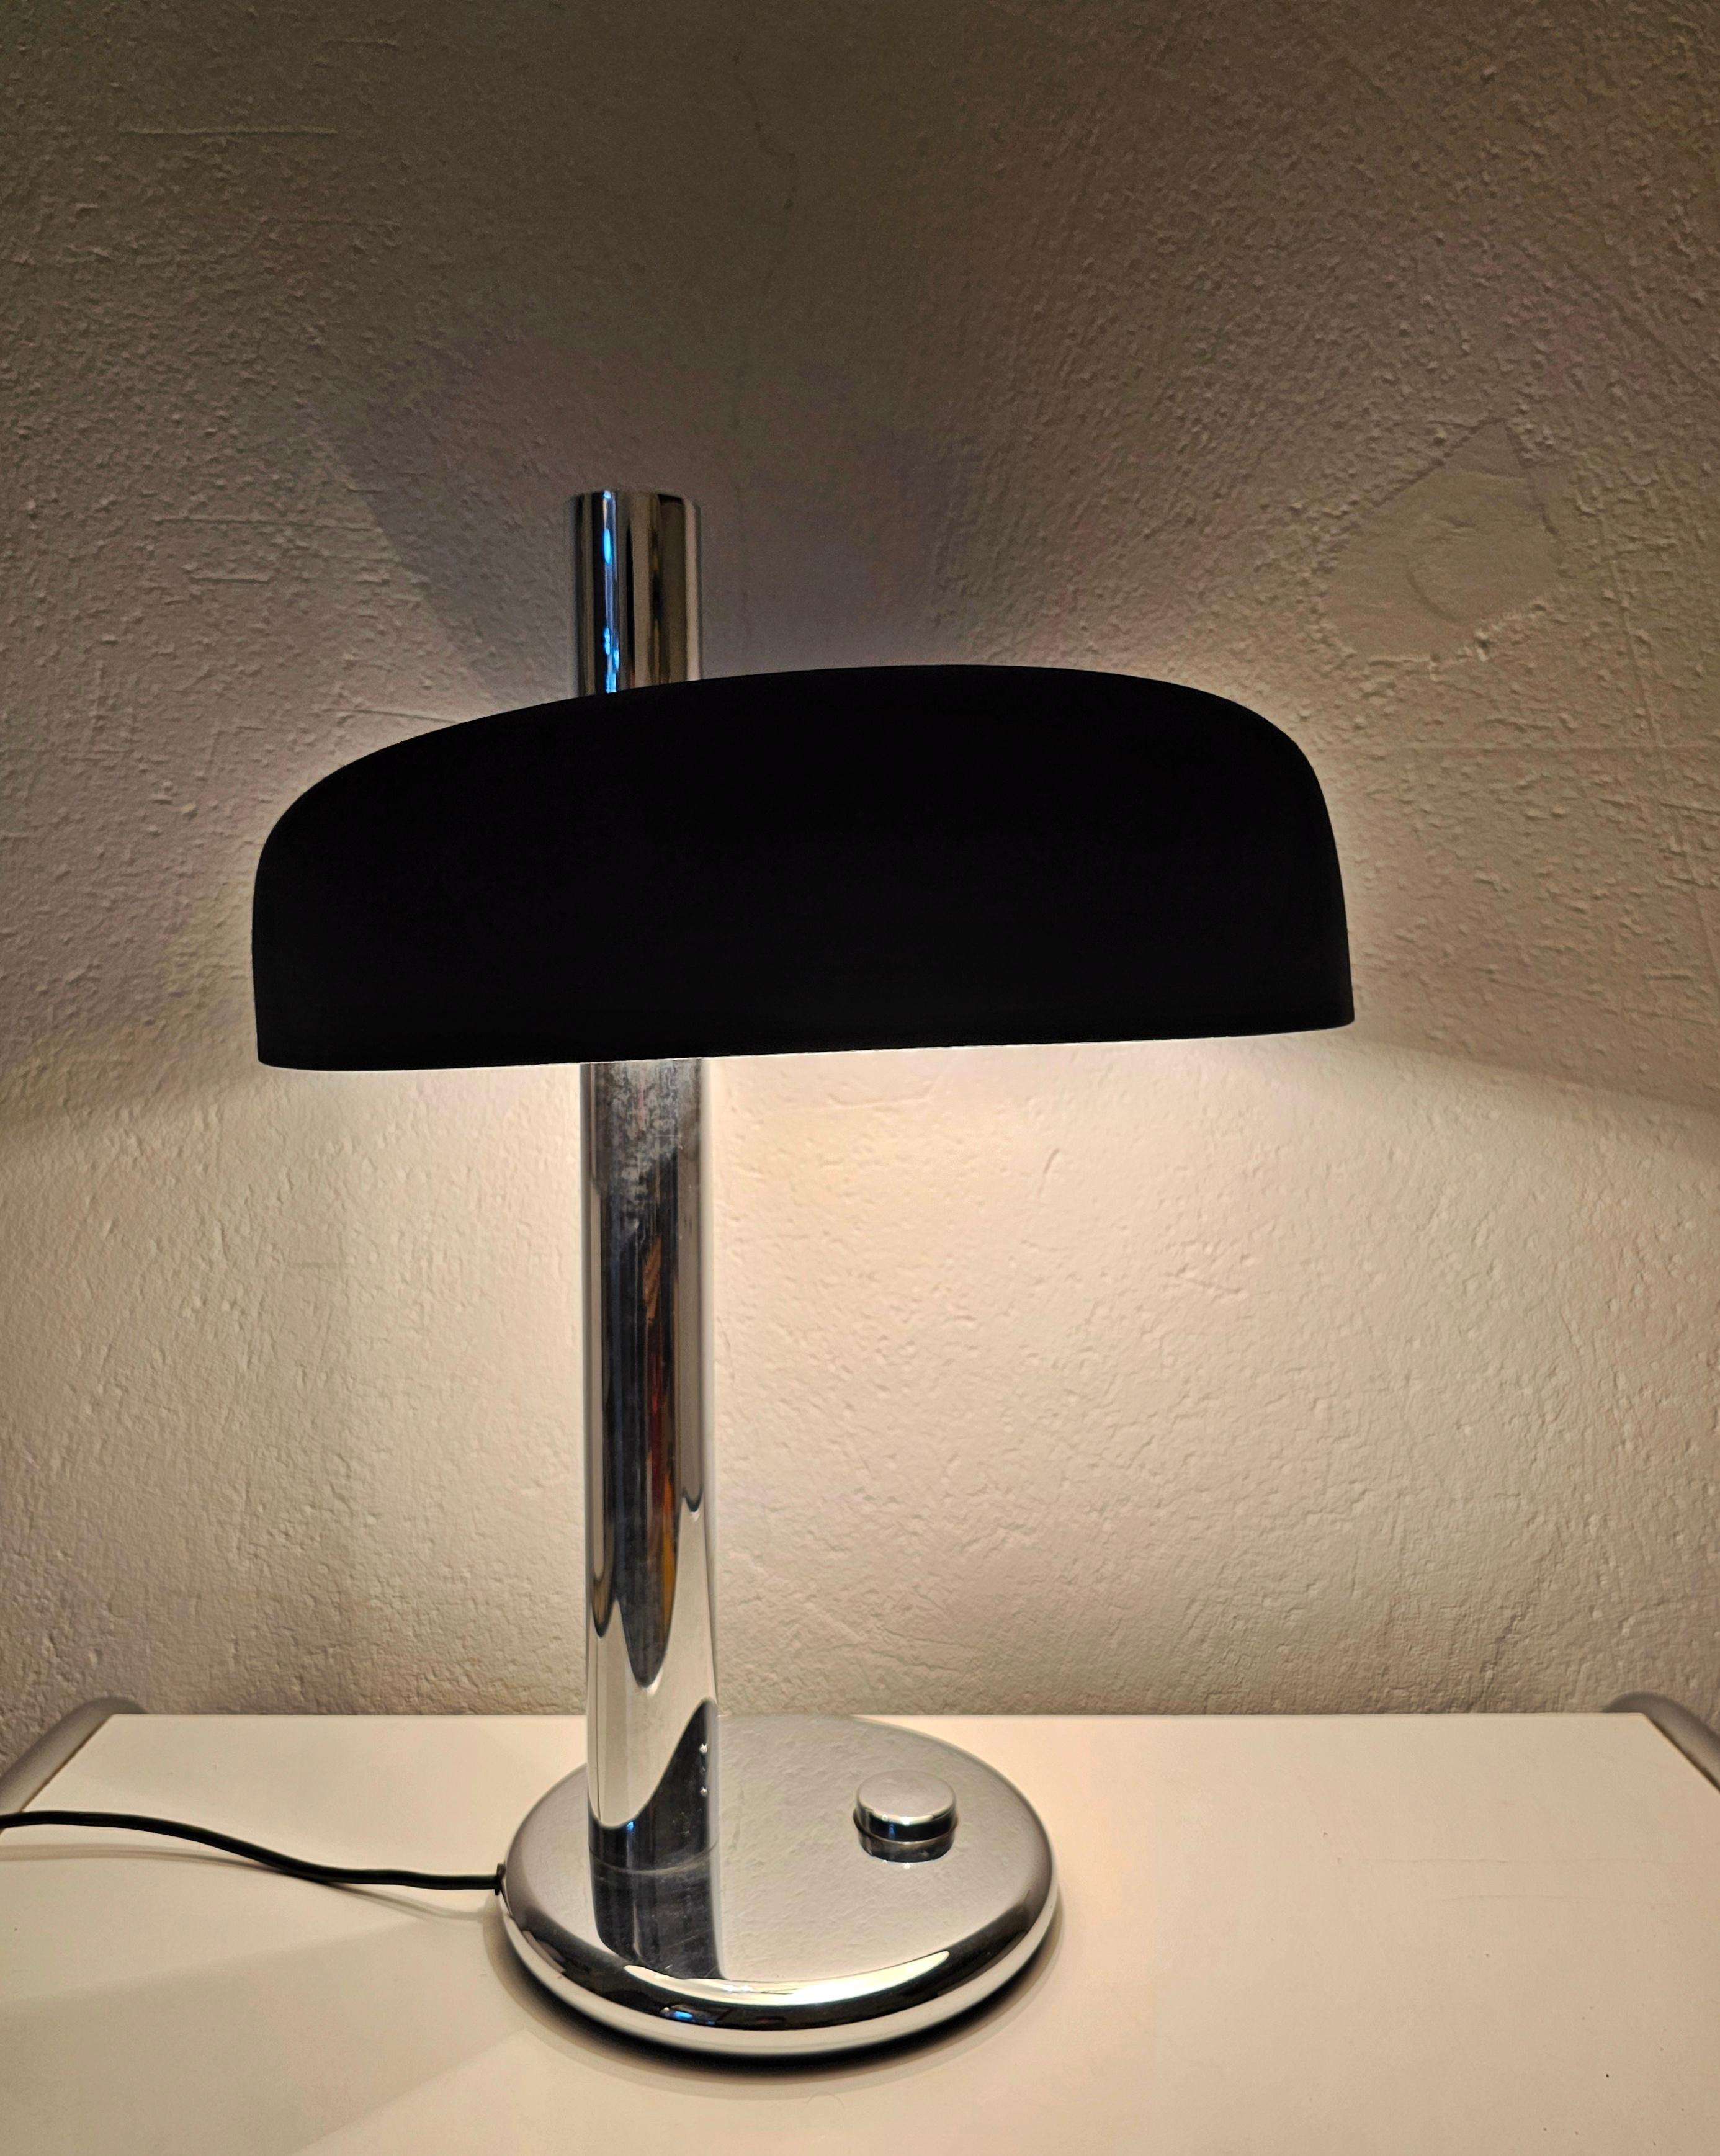 In this listing you will find a spectacular Bauhaus style table lamp Model 7603, which was designed by Heinz Pfaender for the German Manufacturer Hillebrand, which is known for the highest quality lights. It features mushroom shape, with chrome stem